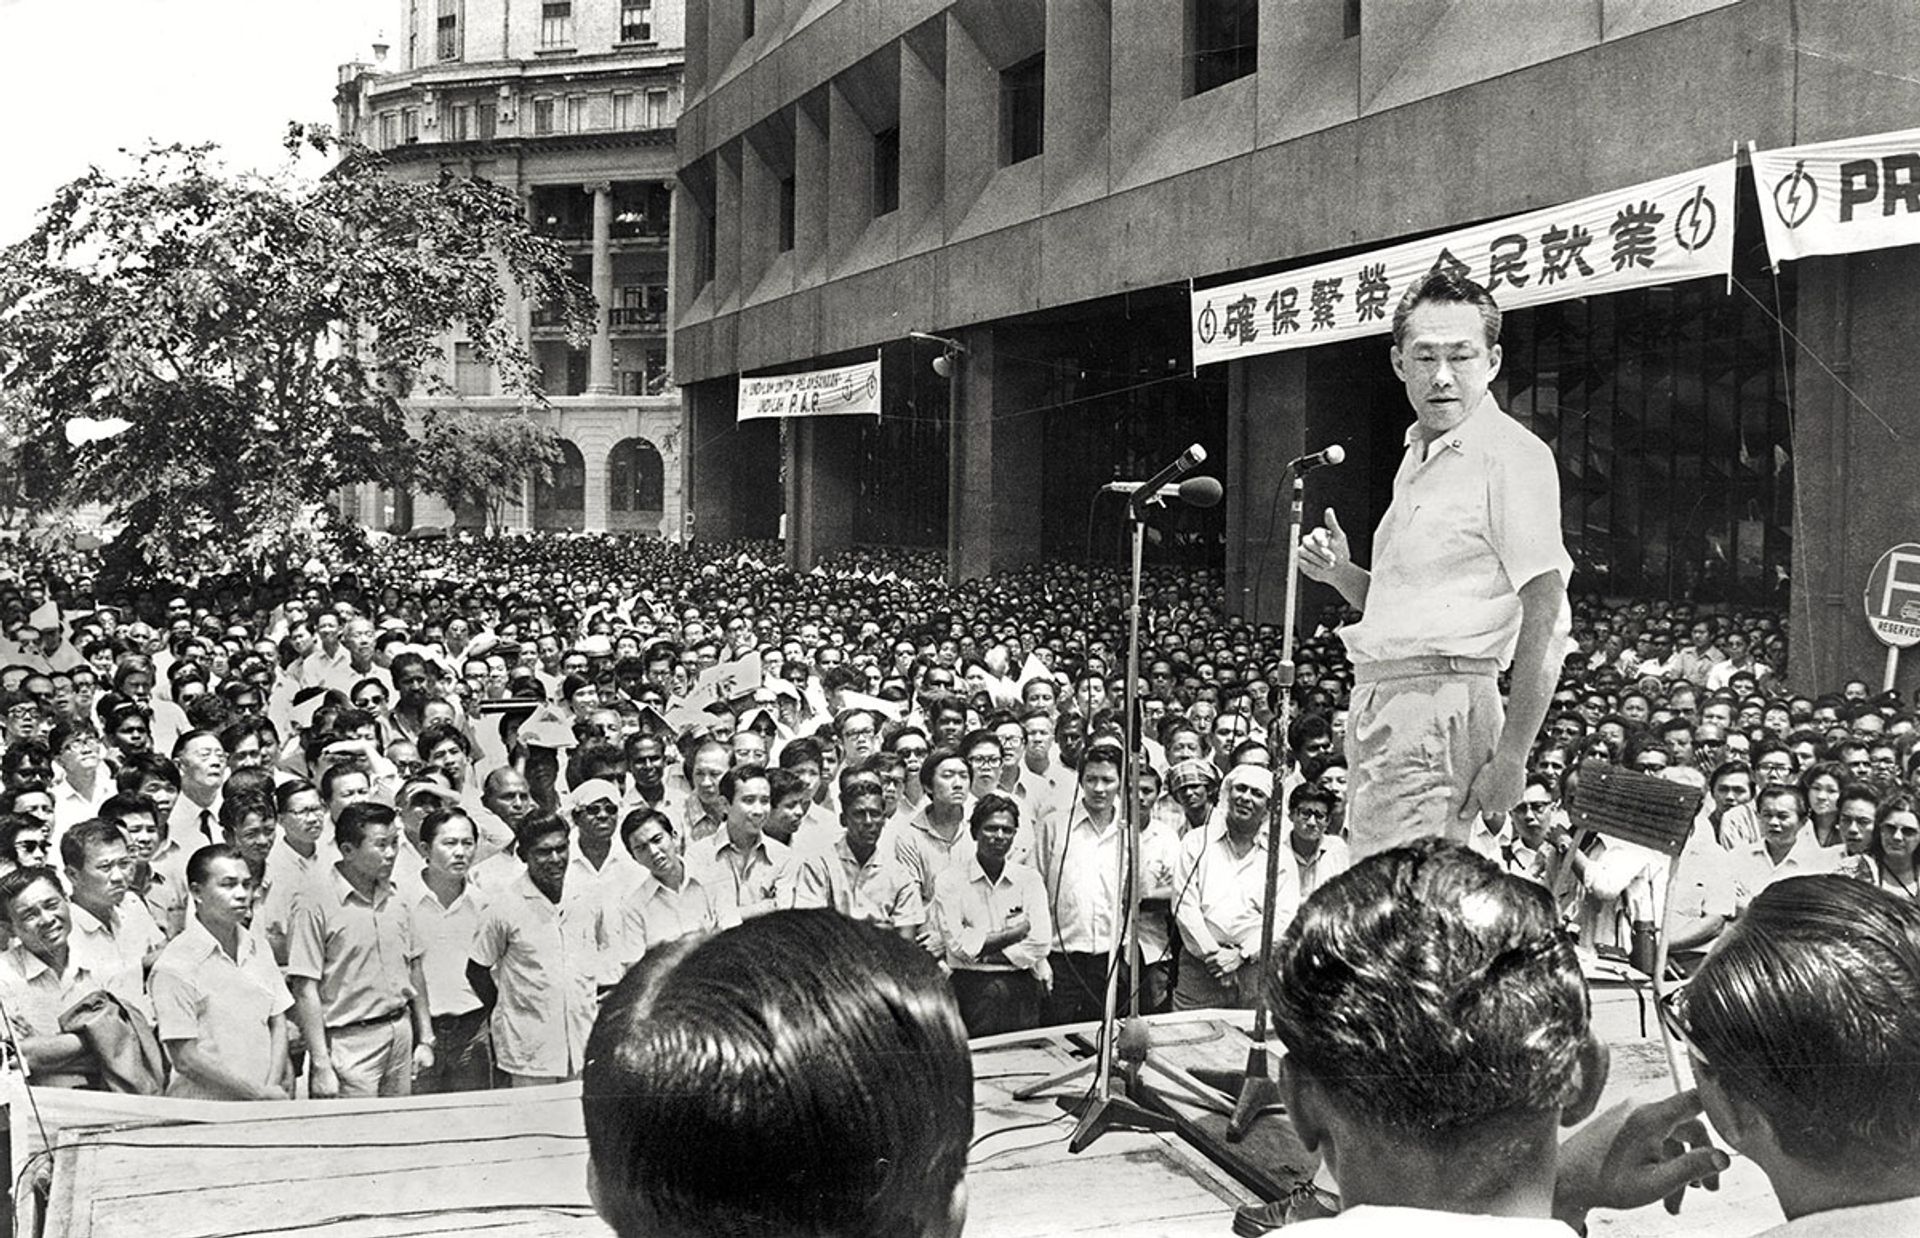 Mr Lee’s lunchtime rally at Fullerton Square on Aug 29, 1972. His lunchtime rallies were the highlight of many election campaigns. Source: The Straits Times